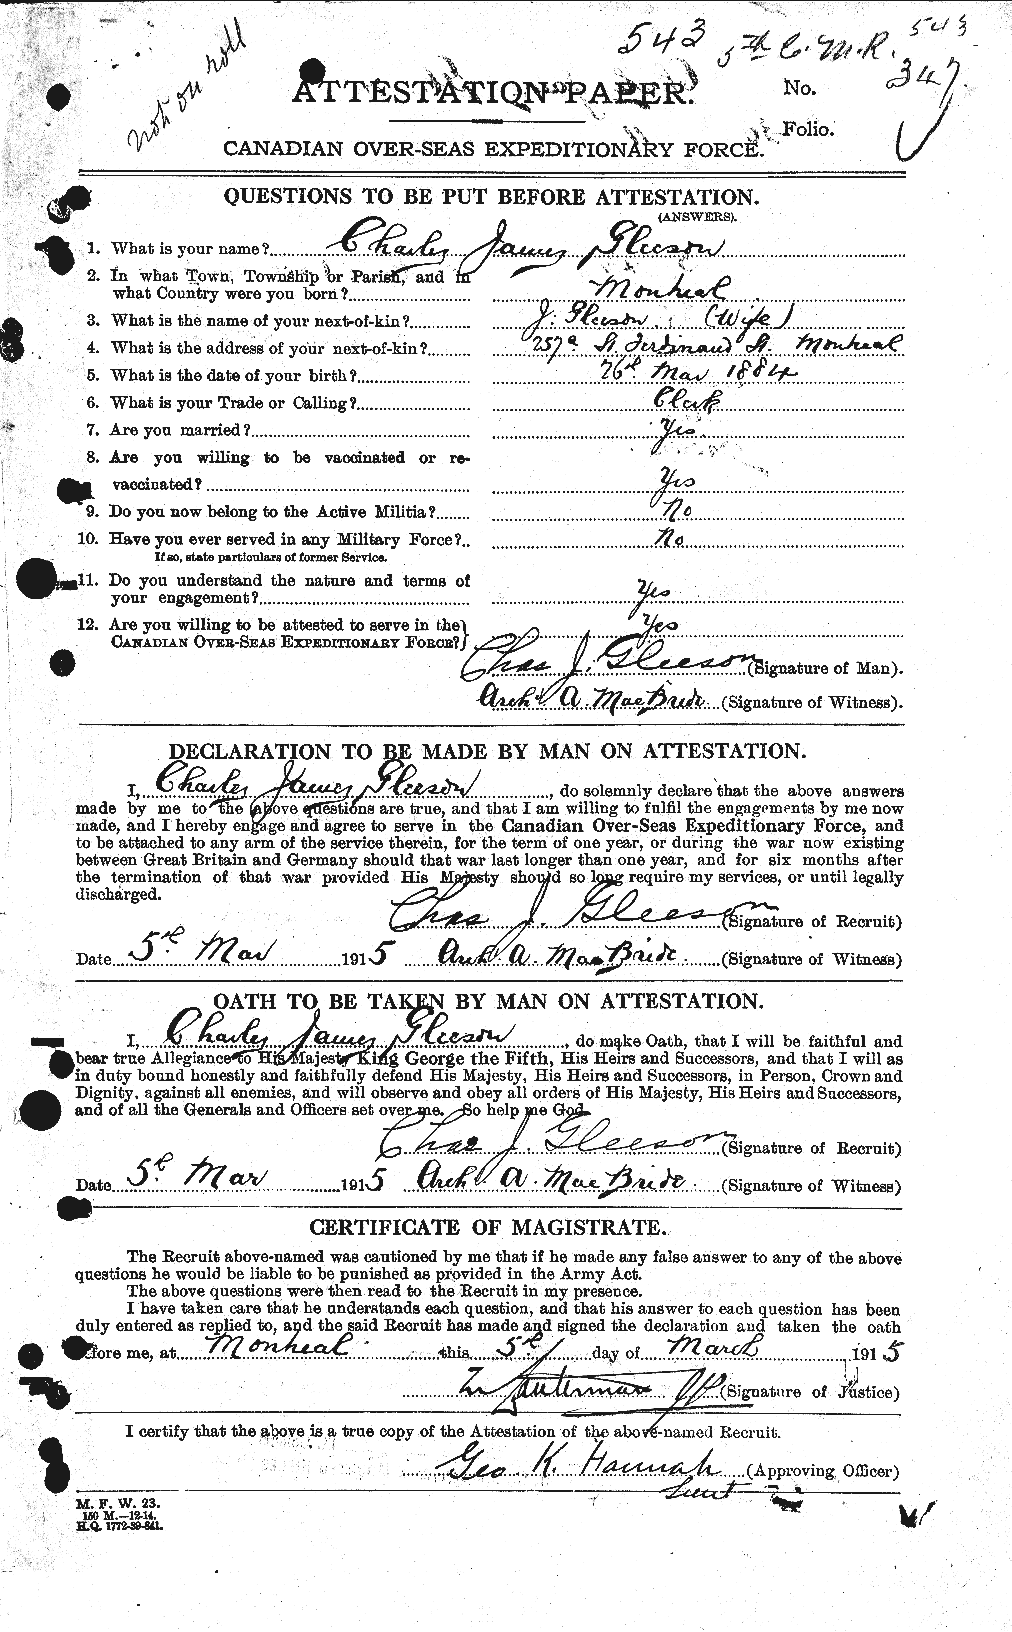 Personnel Records of the First World War - CEF 352779a